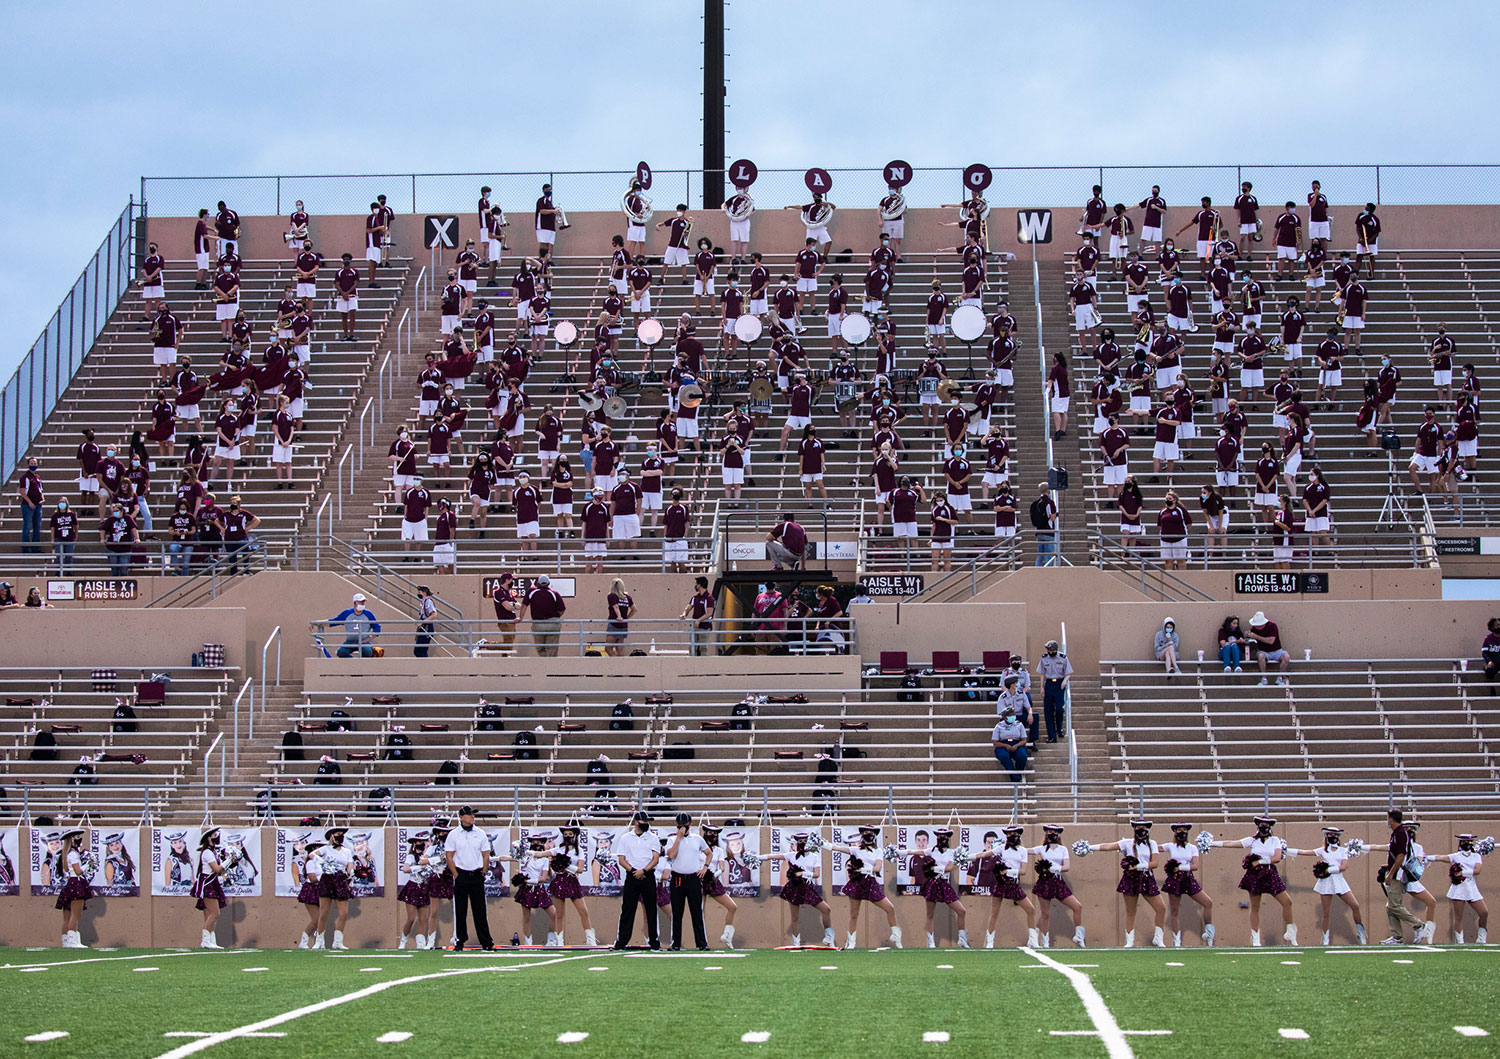 The band sits on the visitors' side at a Plano Senior High game // photo Kim Peichel Photography